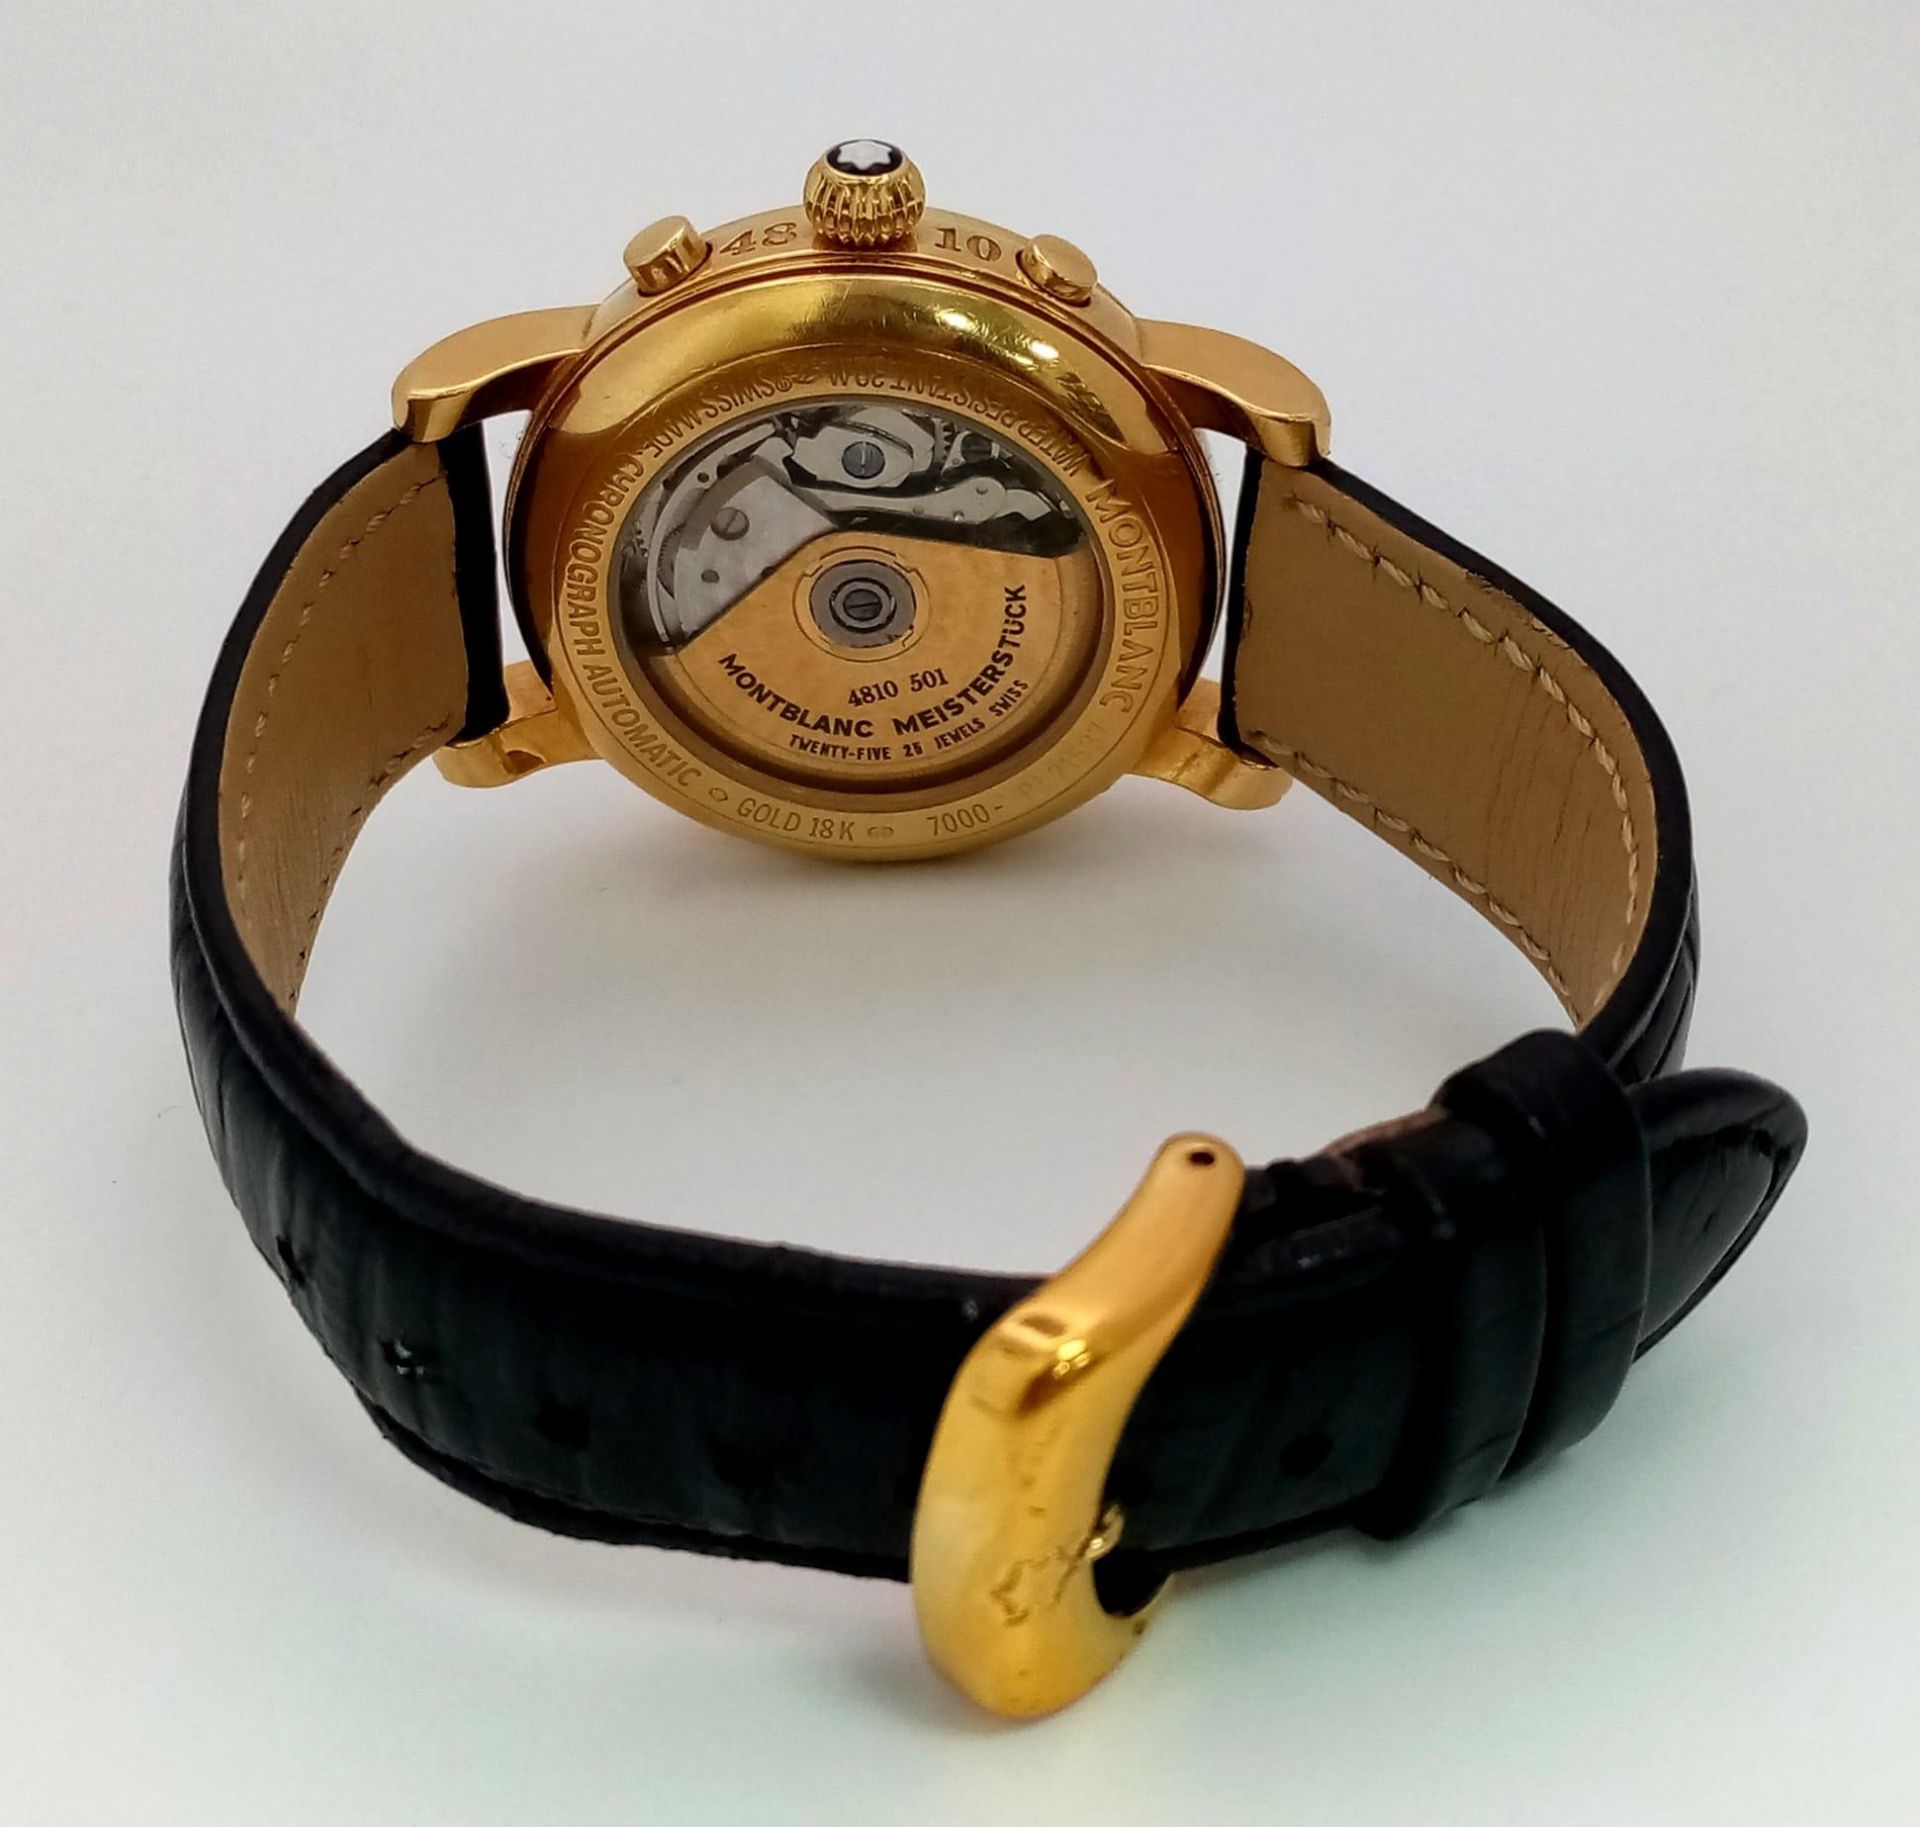 A Montblanc 18K Gold Meisterstuck 4810 Automatic Gents Watch. Black leather strap. 18k gold case - - Image 11 of 23